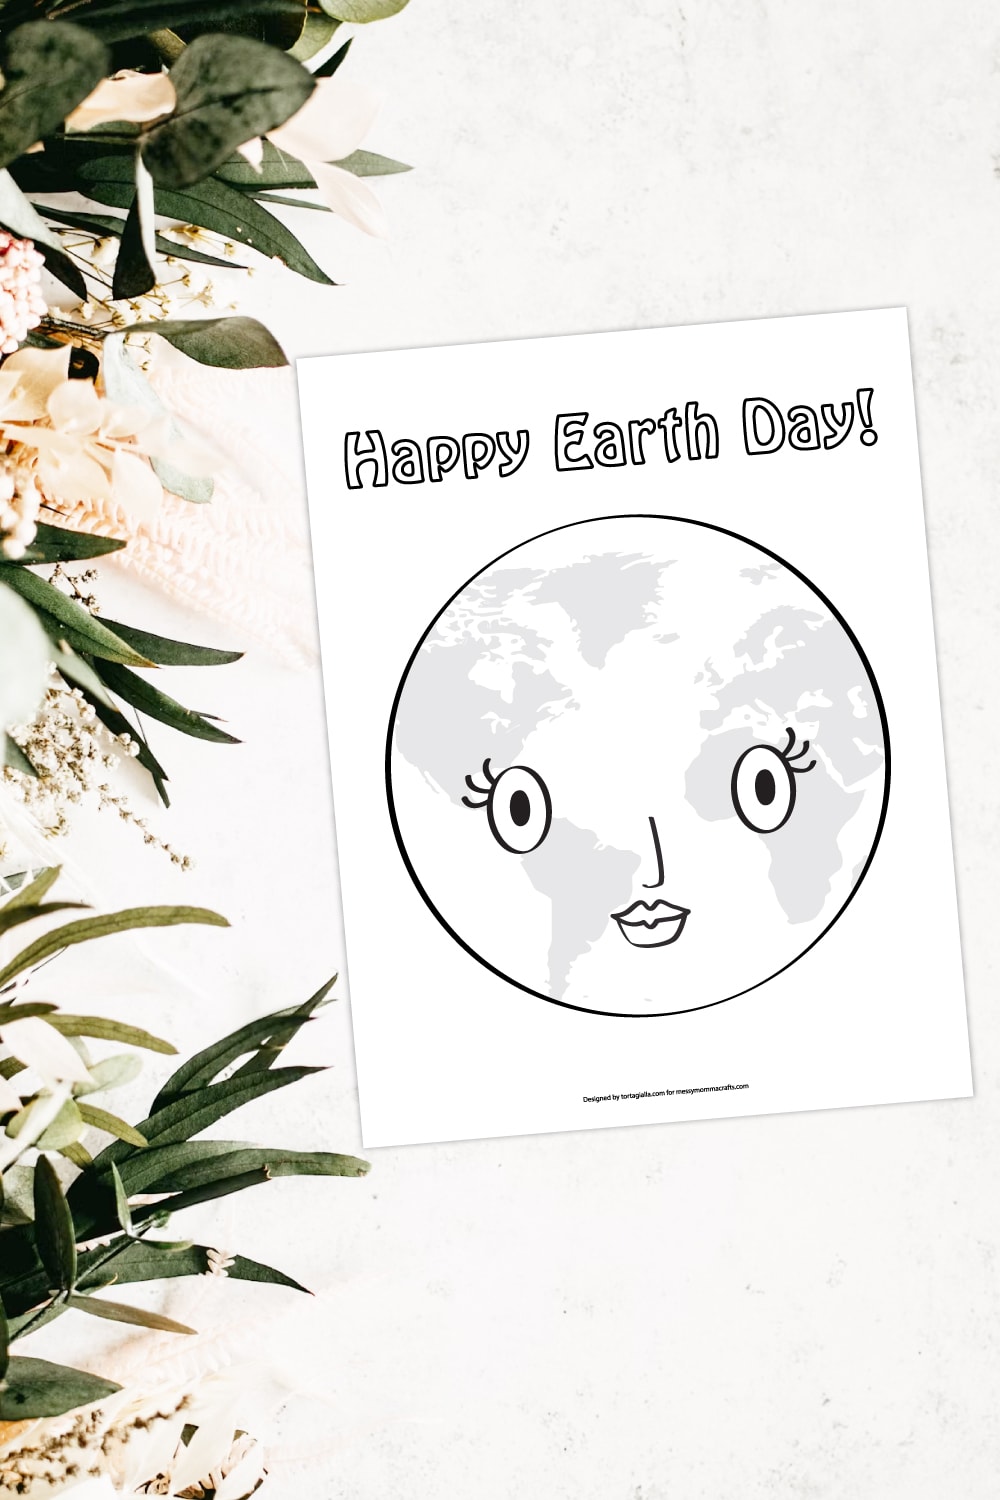 Preview of happy earth day coloring page illustration on white background with white flowers and green leaves on the left side border. 